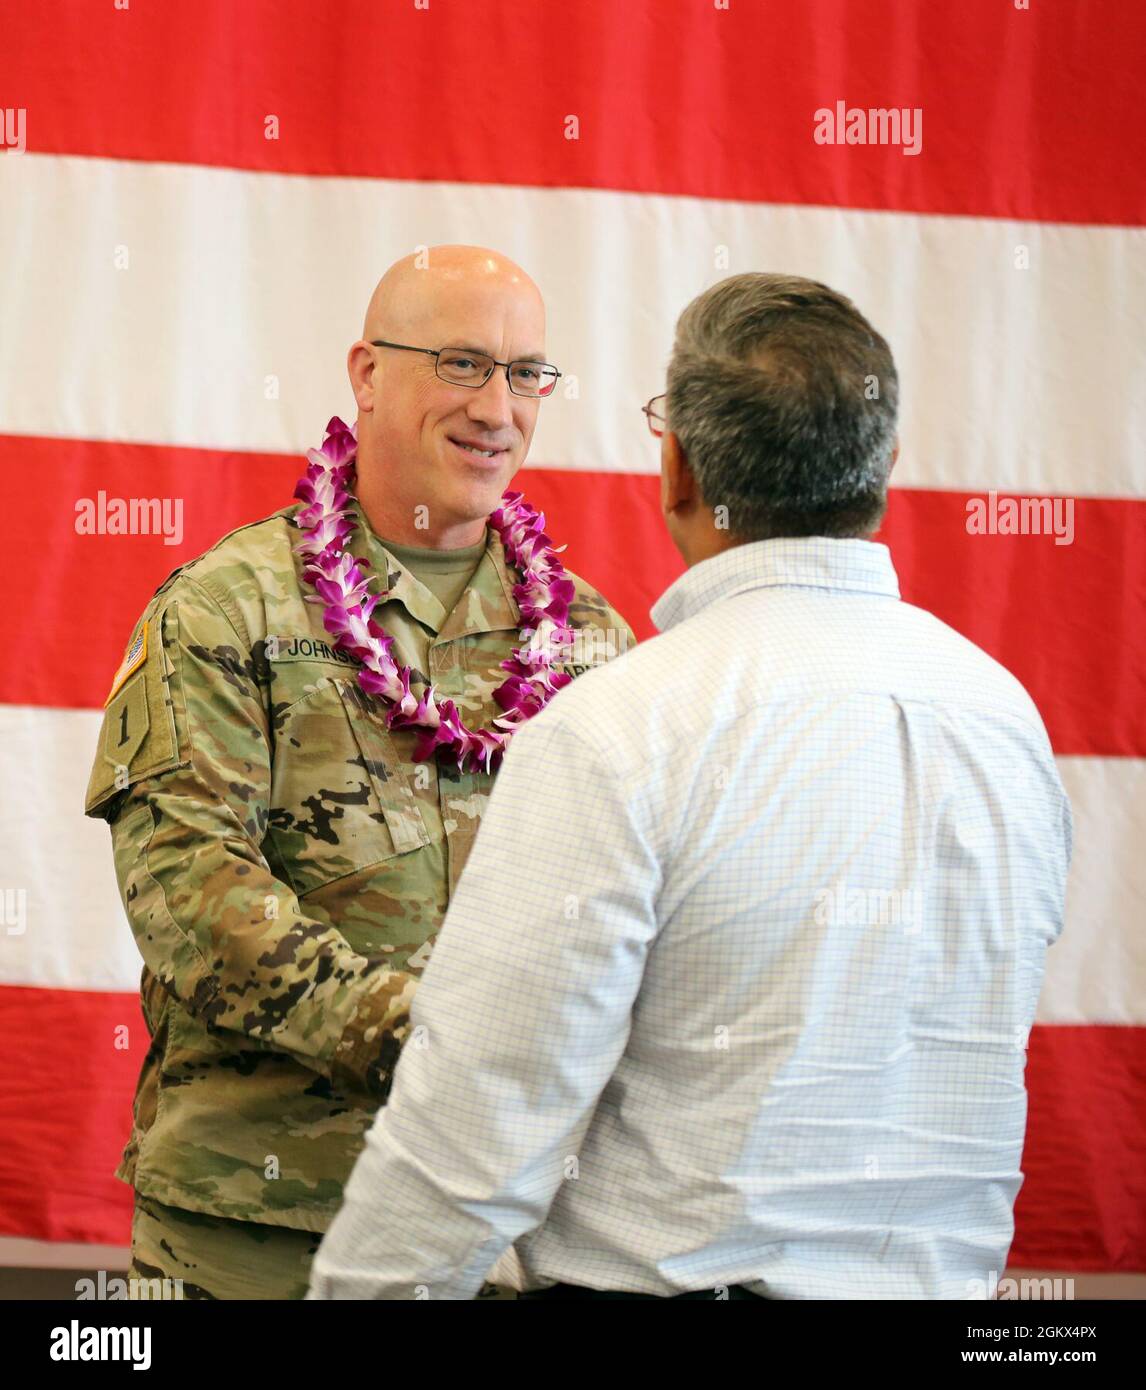 Chief Warrant Officer Five Jim Johnson shakes hands with Col. (Ret.) Anthony Lieggi during a Joint Chief Warrant Officer Five promotion ceremony on July 15, 2021 at the Pierce County Readiness Center, Camp Murray, Wash. Stock Photo